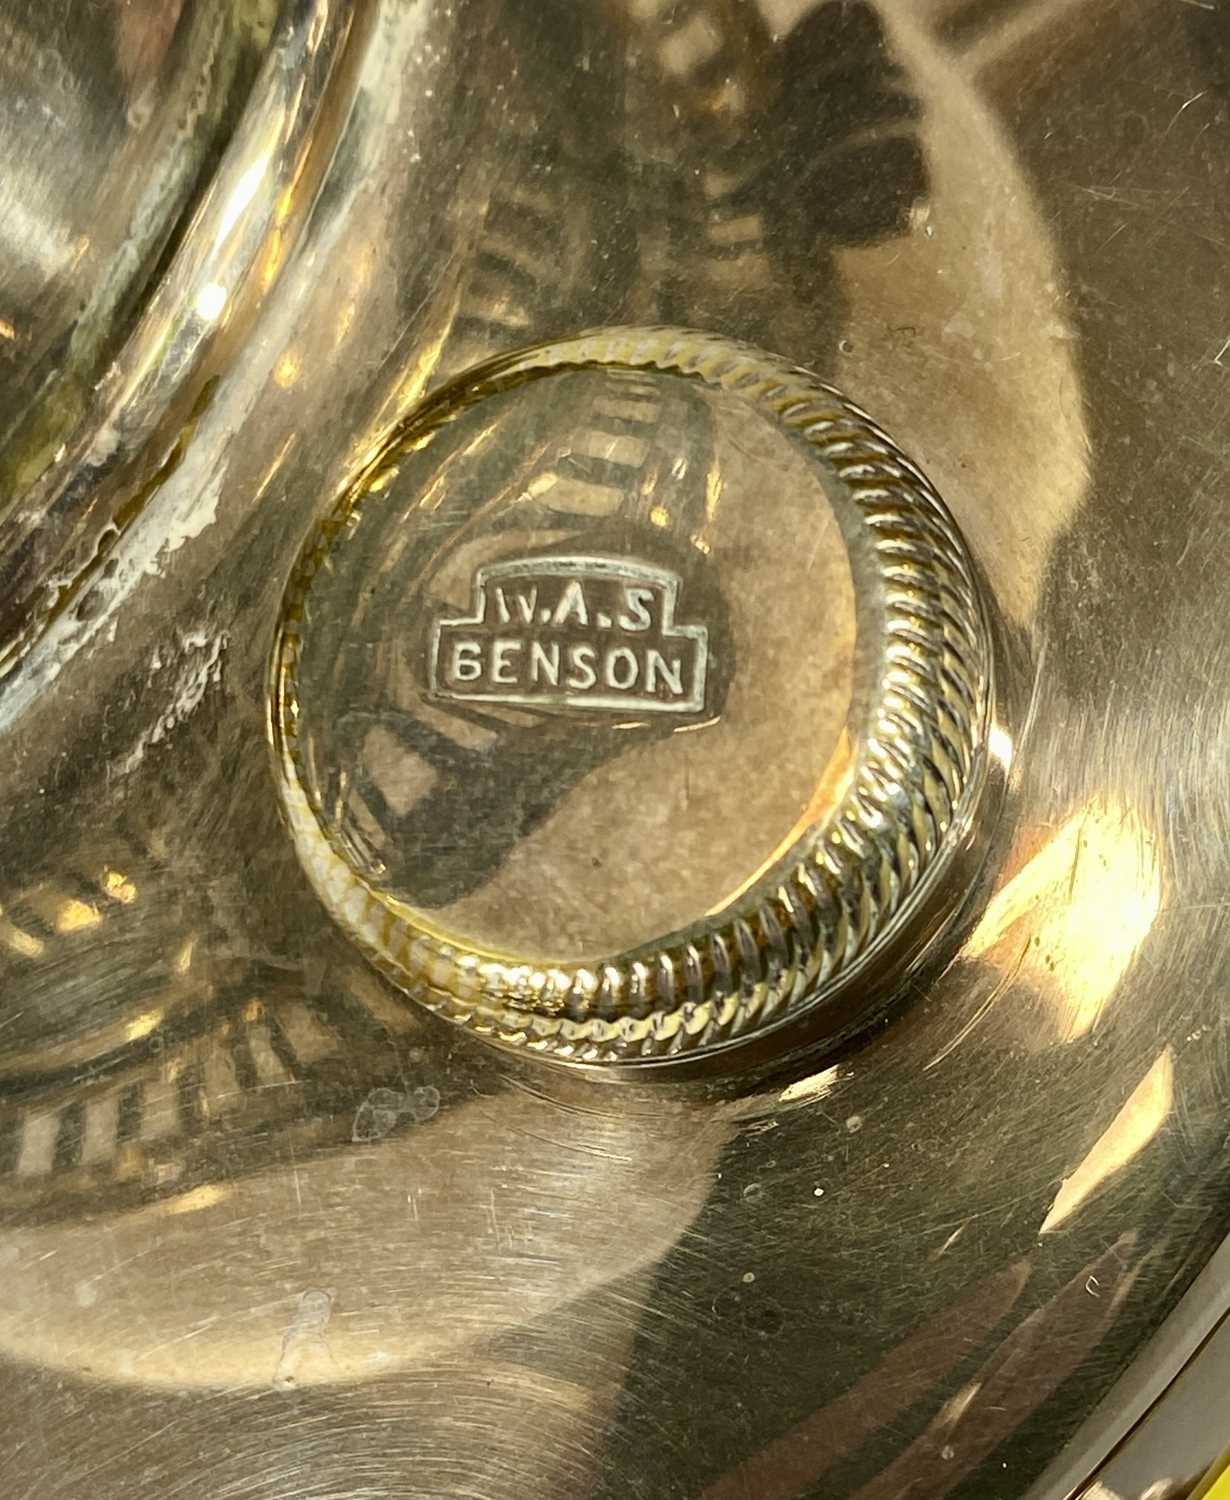 SILVER PLATED OIL LAMP by W. A. S. Benson, twin burners, circular reservoir, leaf design under - Image 3 of 3